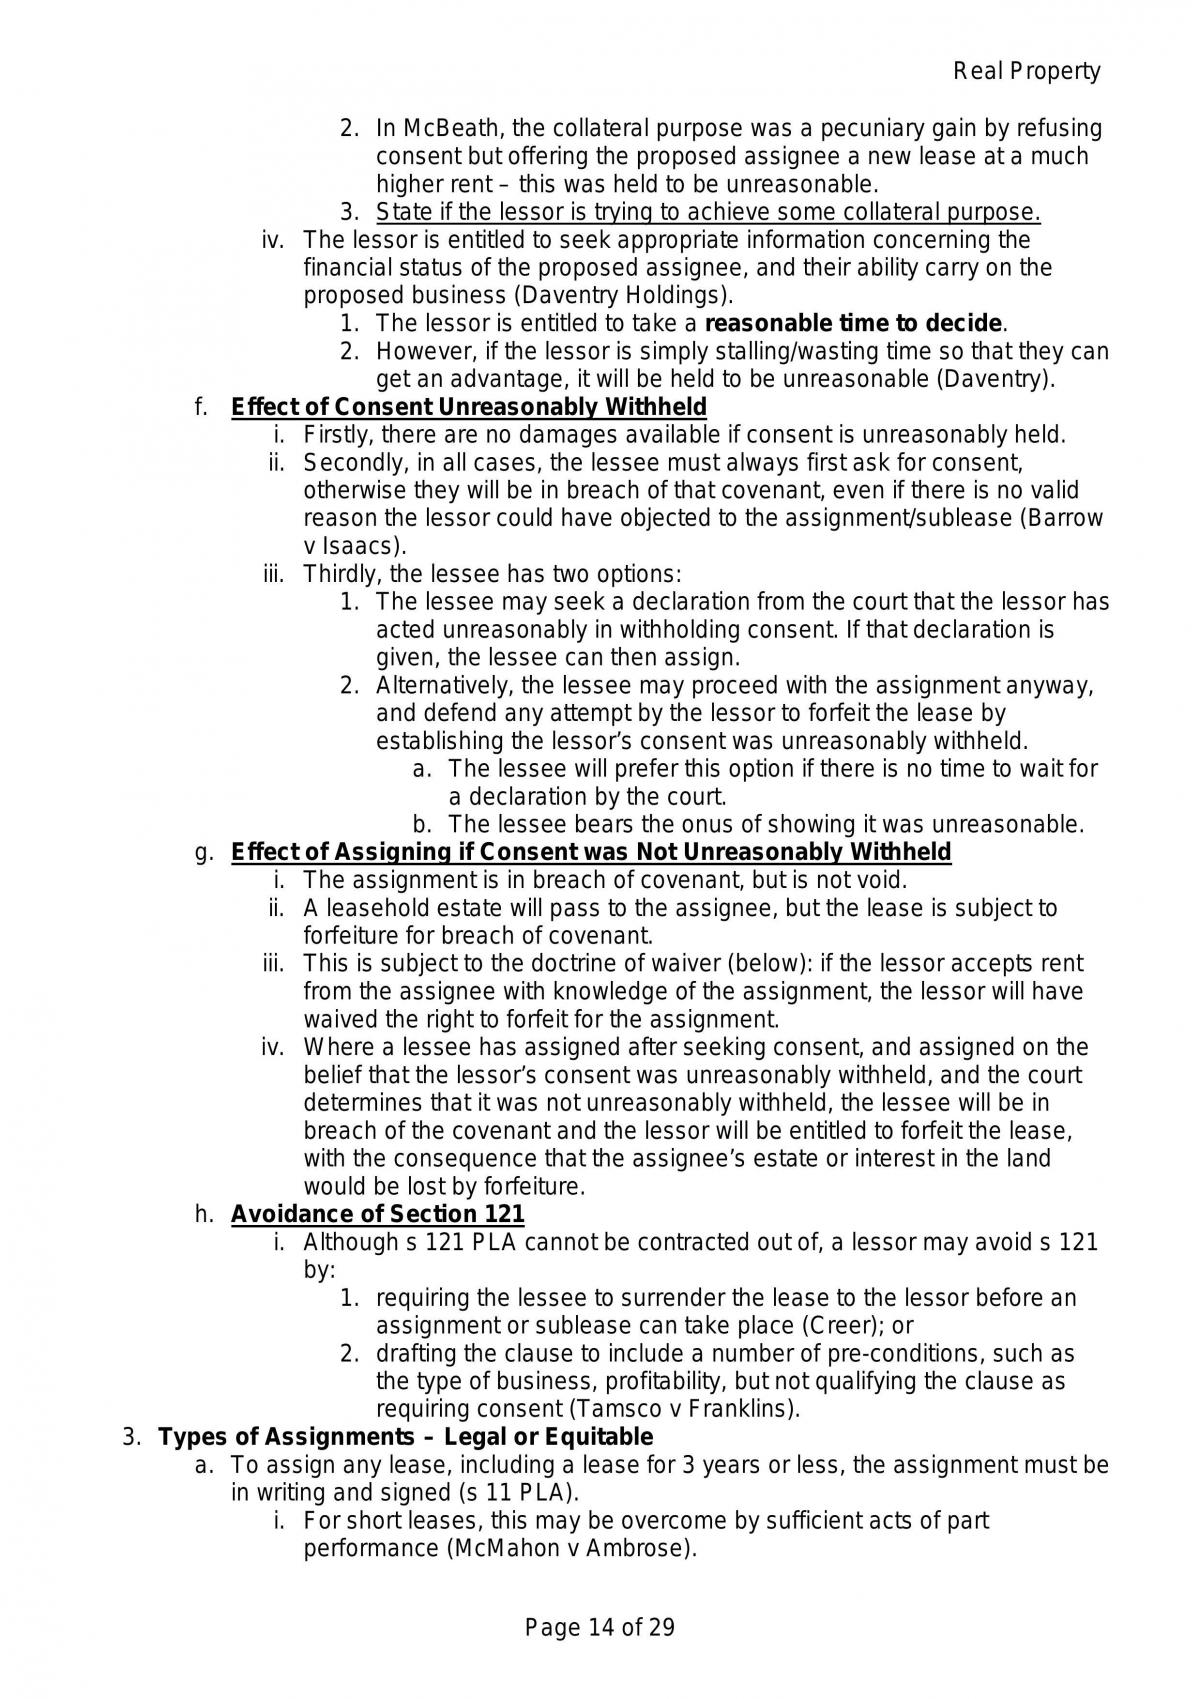 Real Property Leases - Page 14